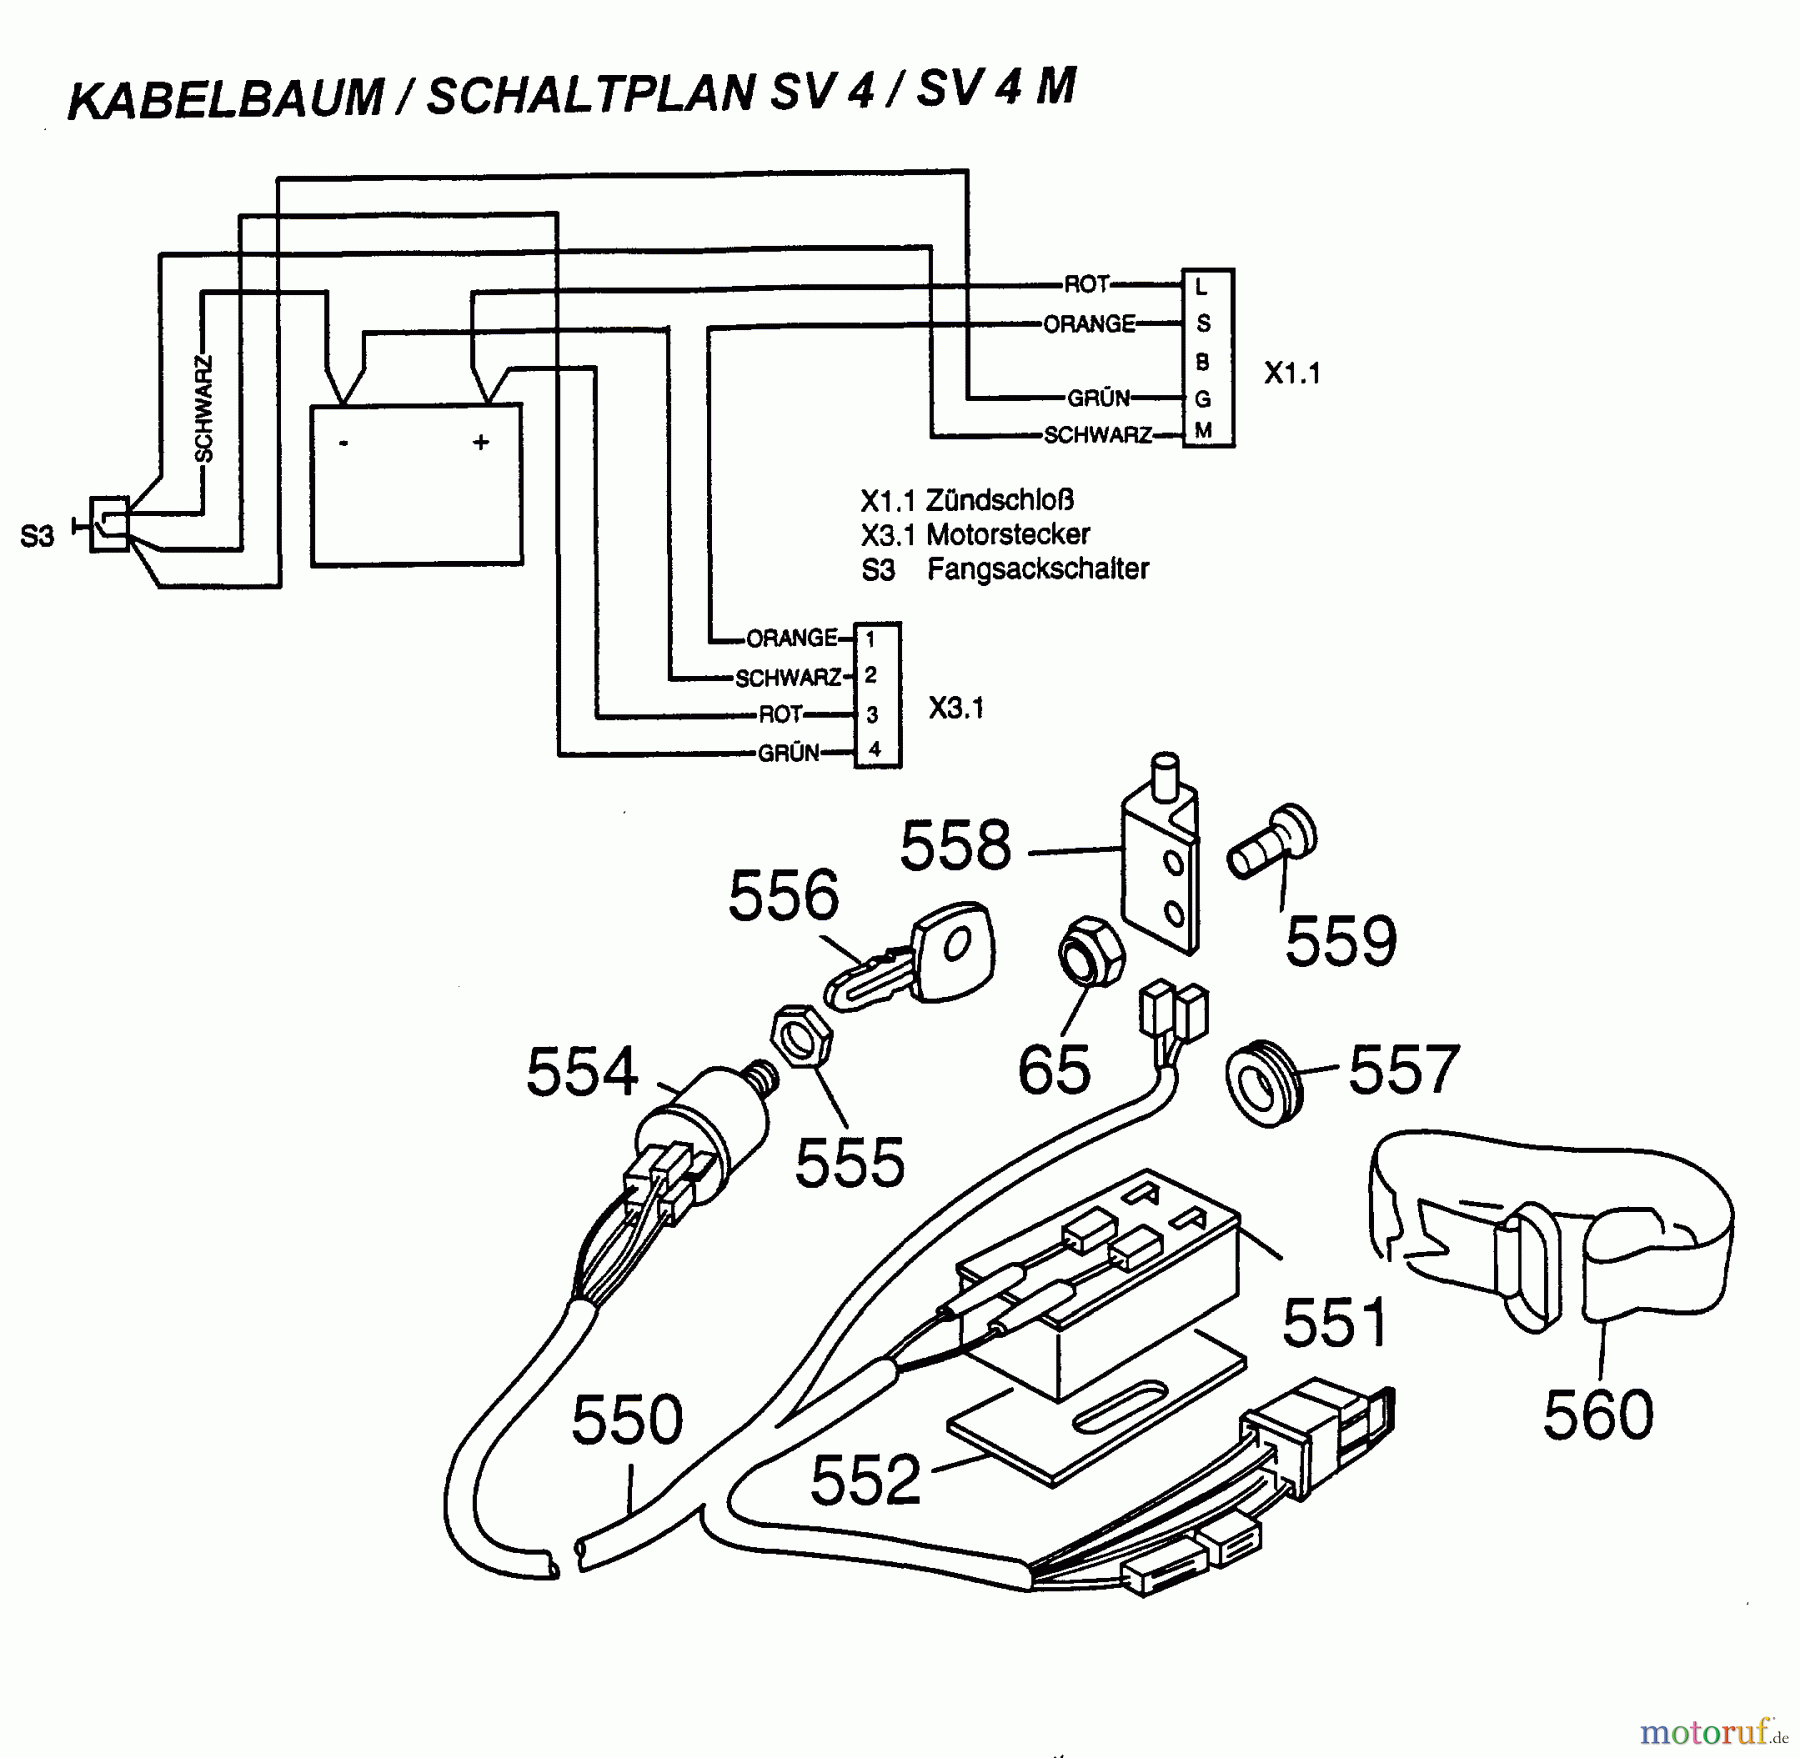 2003 Kinetic Moped Wiring Diagram